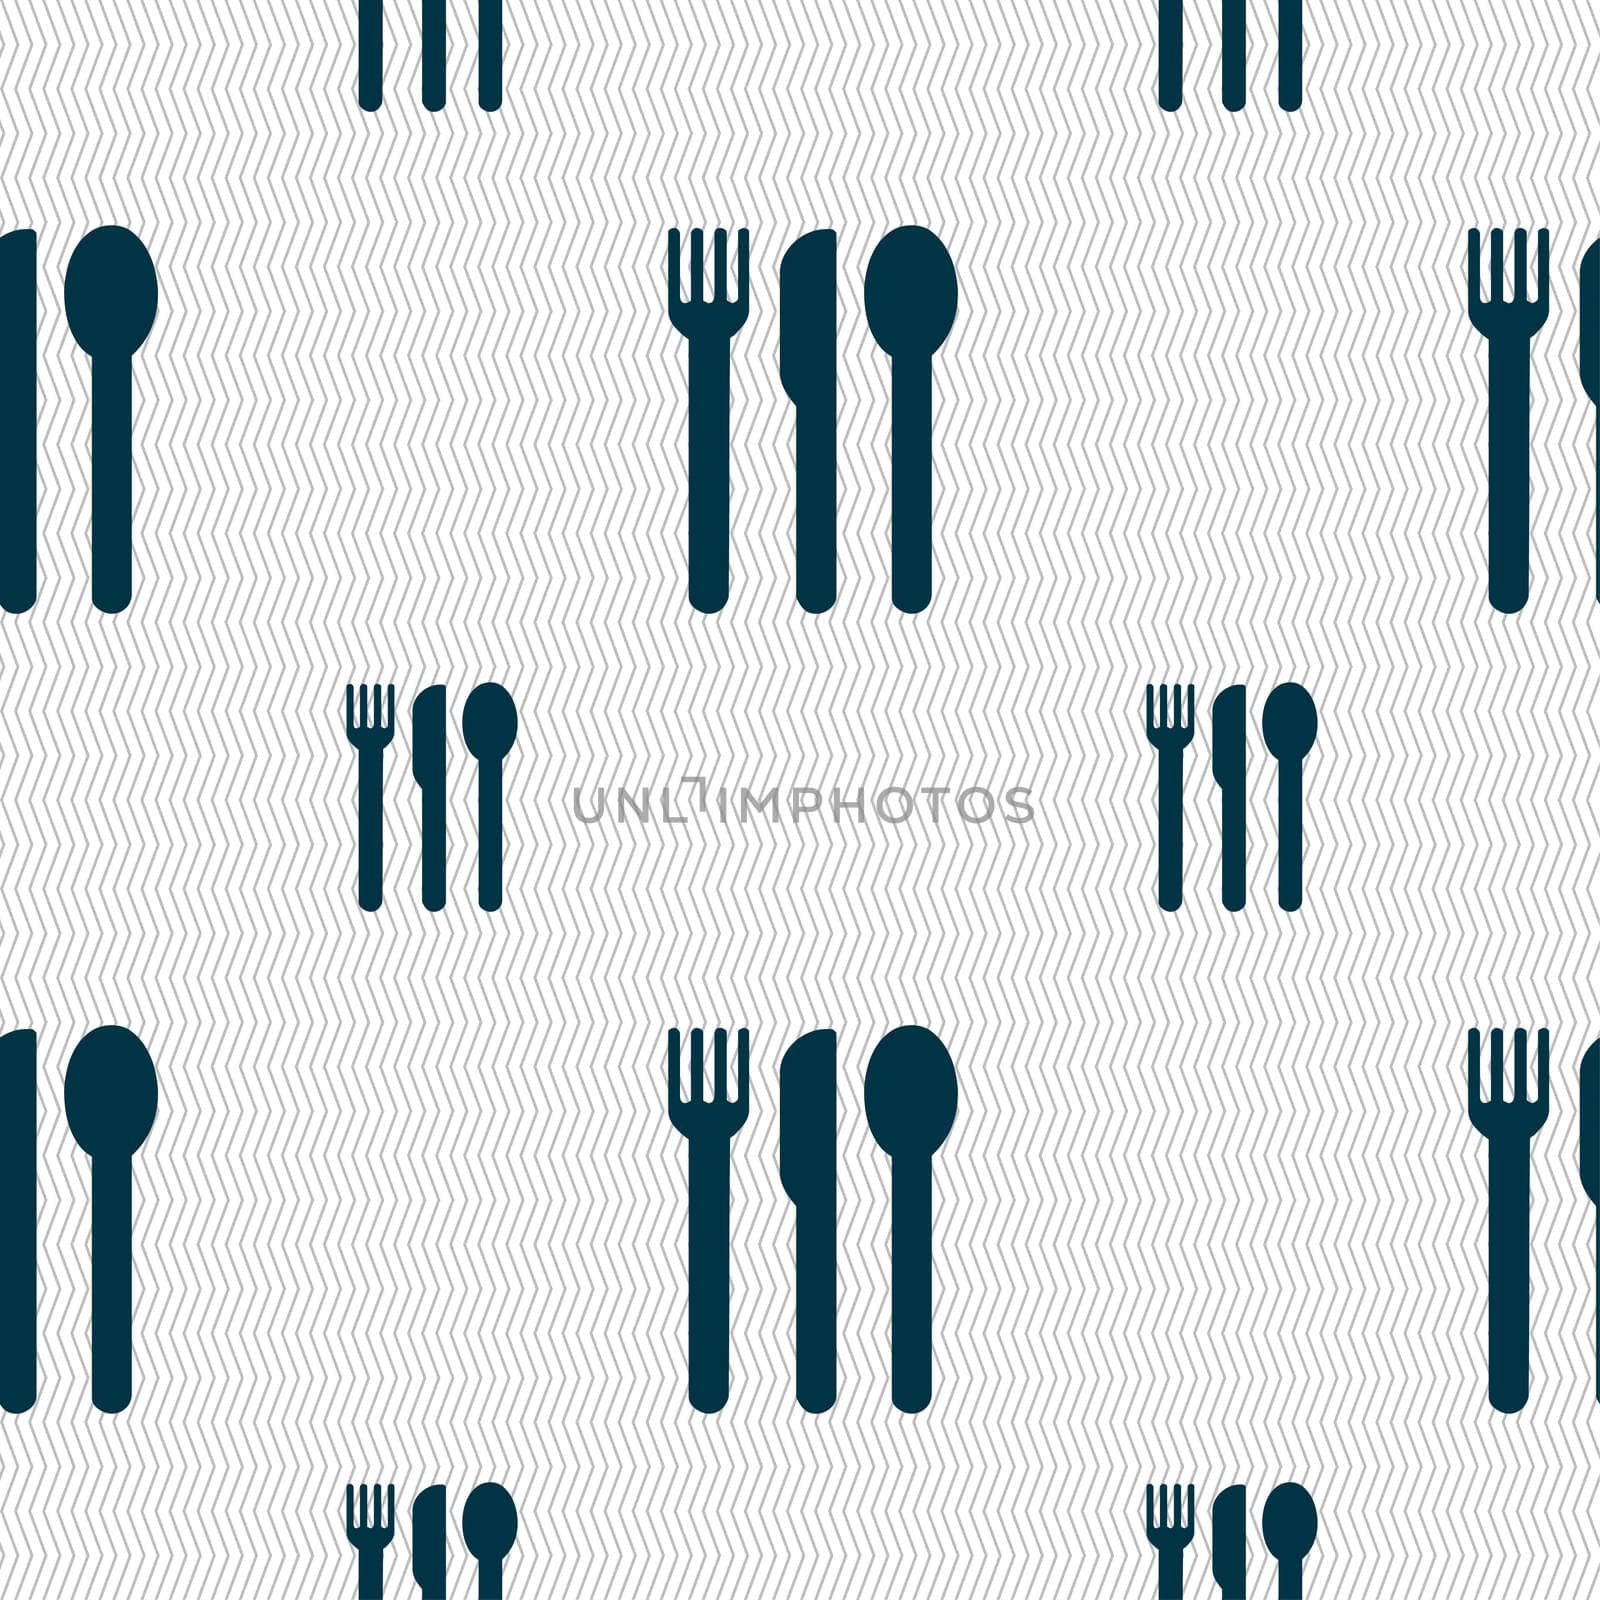 fork, knife, spoon icon sign. Seamless pattern with geometric texture. illustration